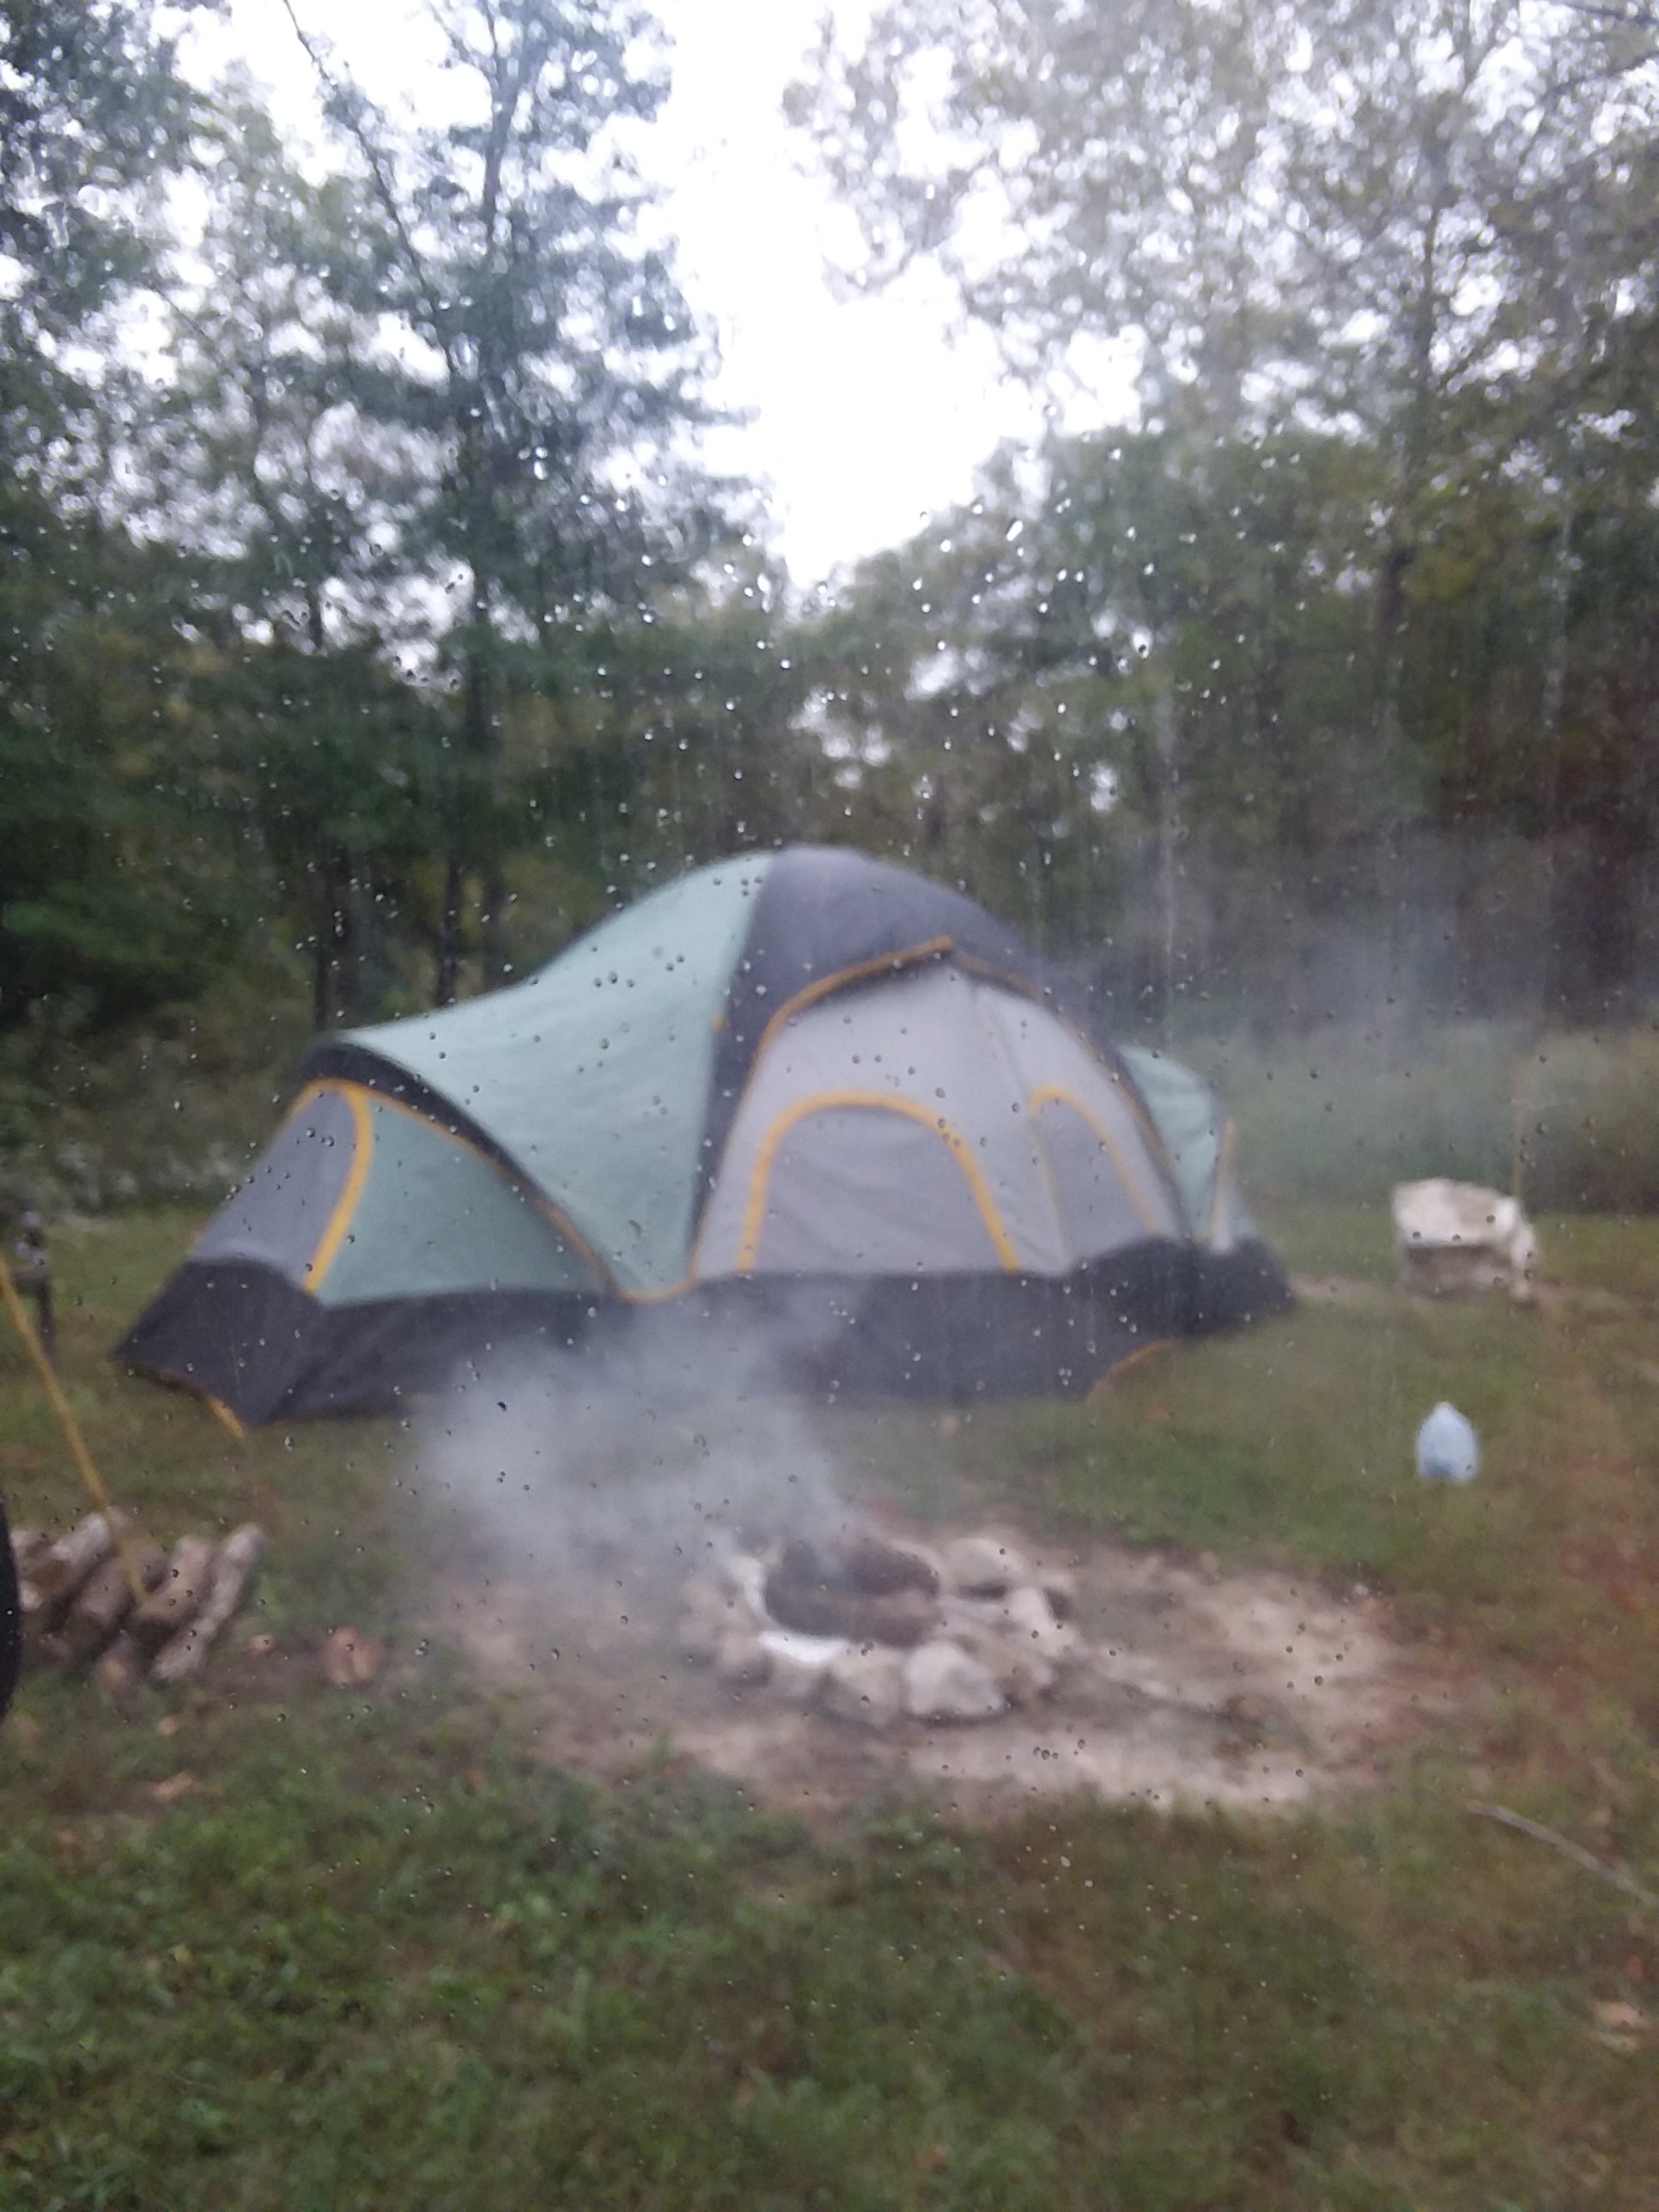 Camper submitted image from Fiery Fork Conservation Area - 1